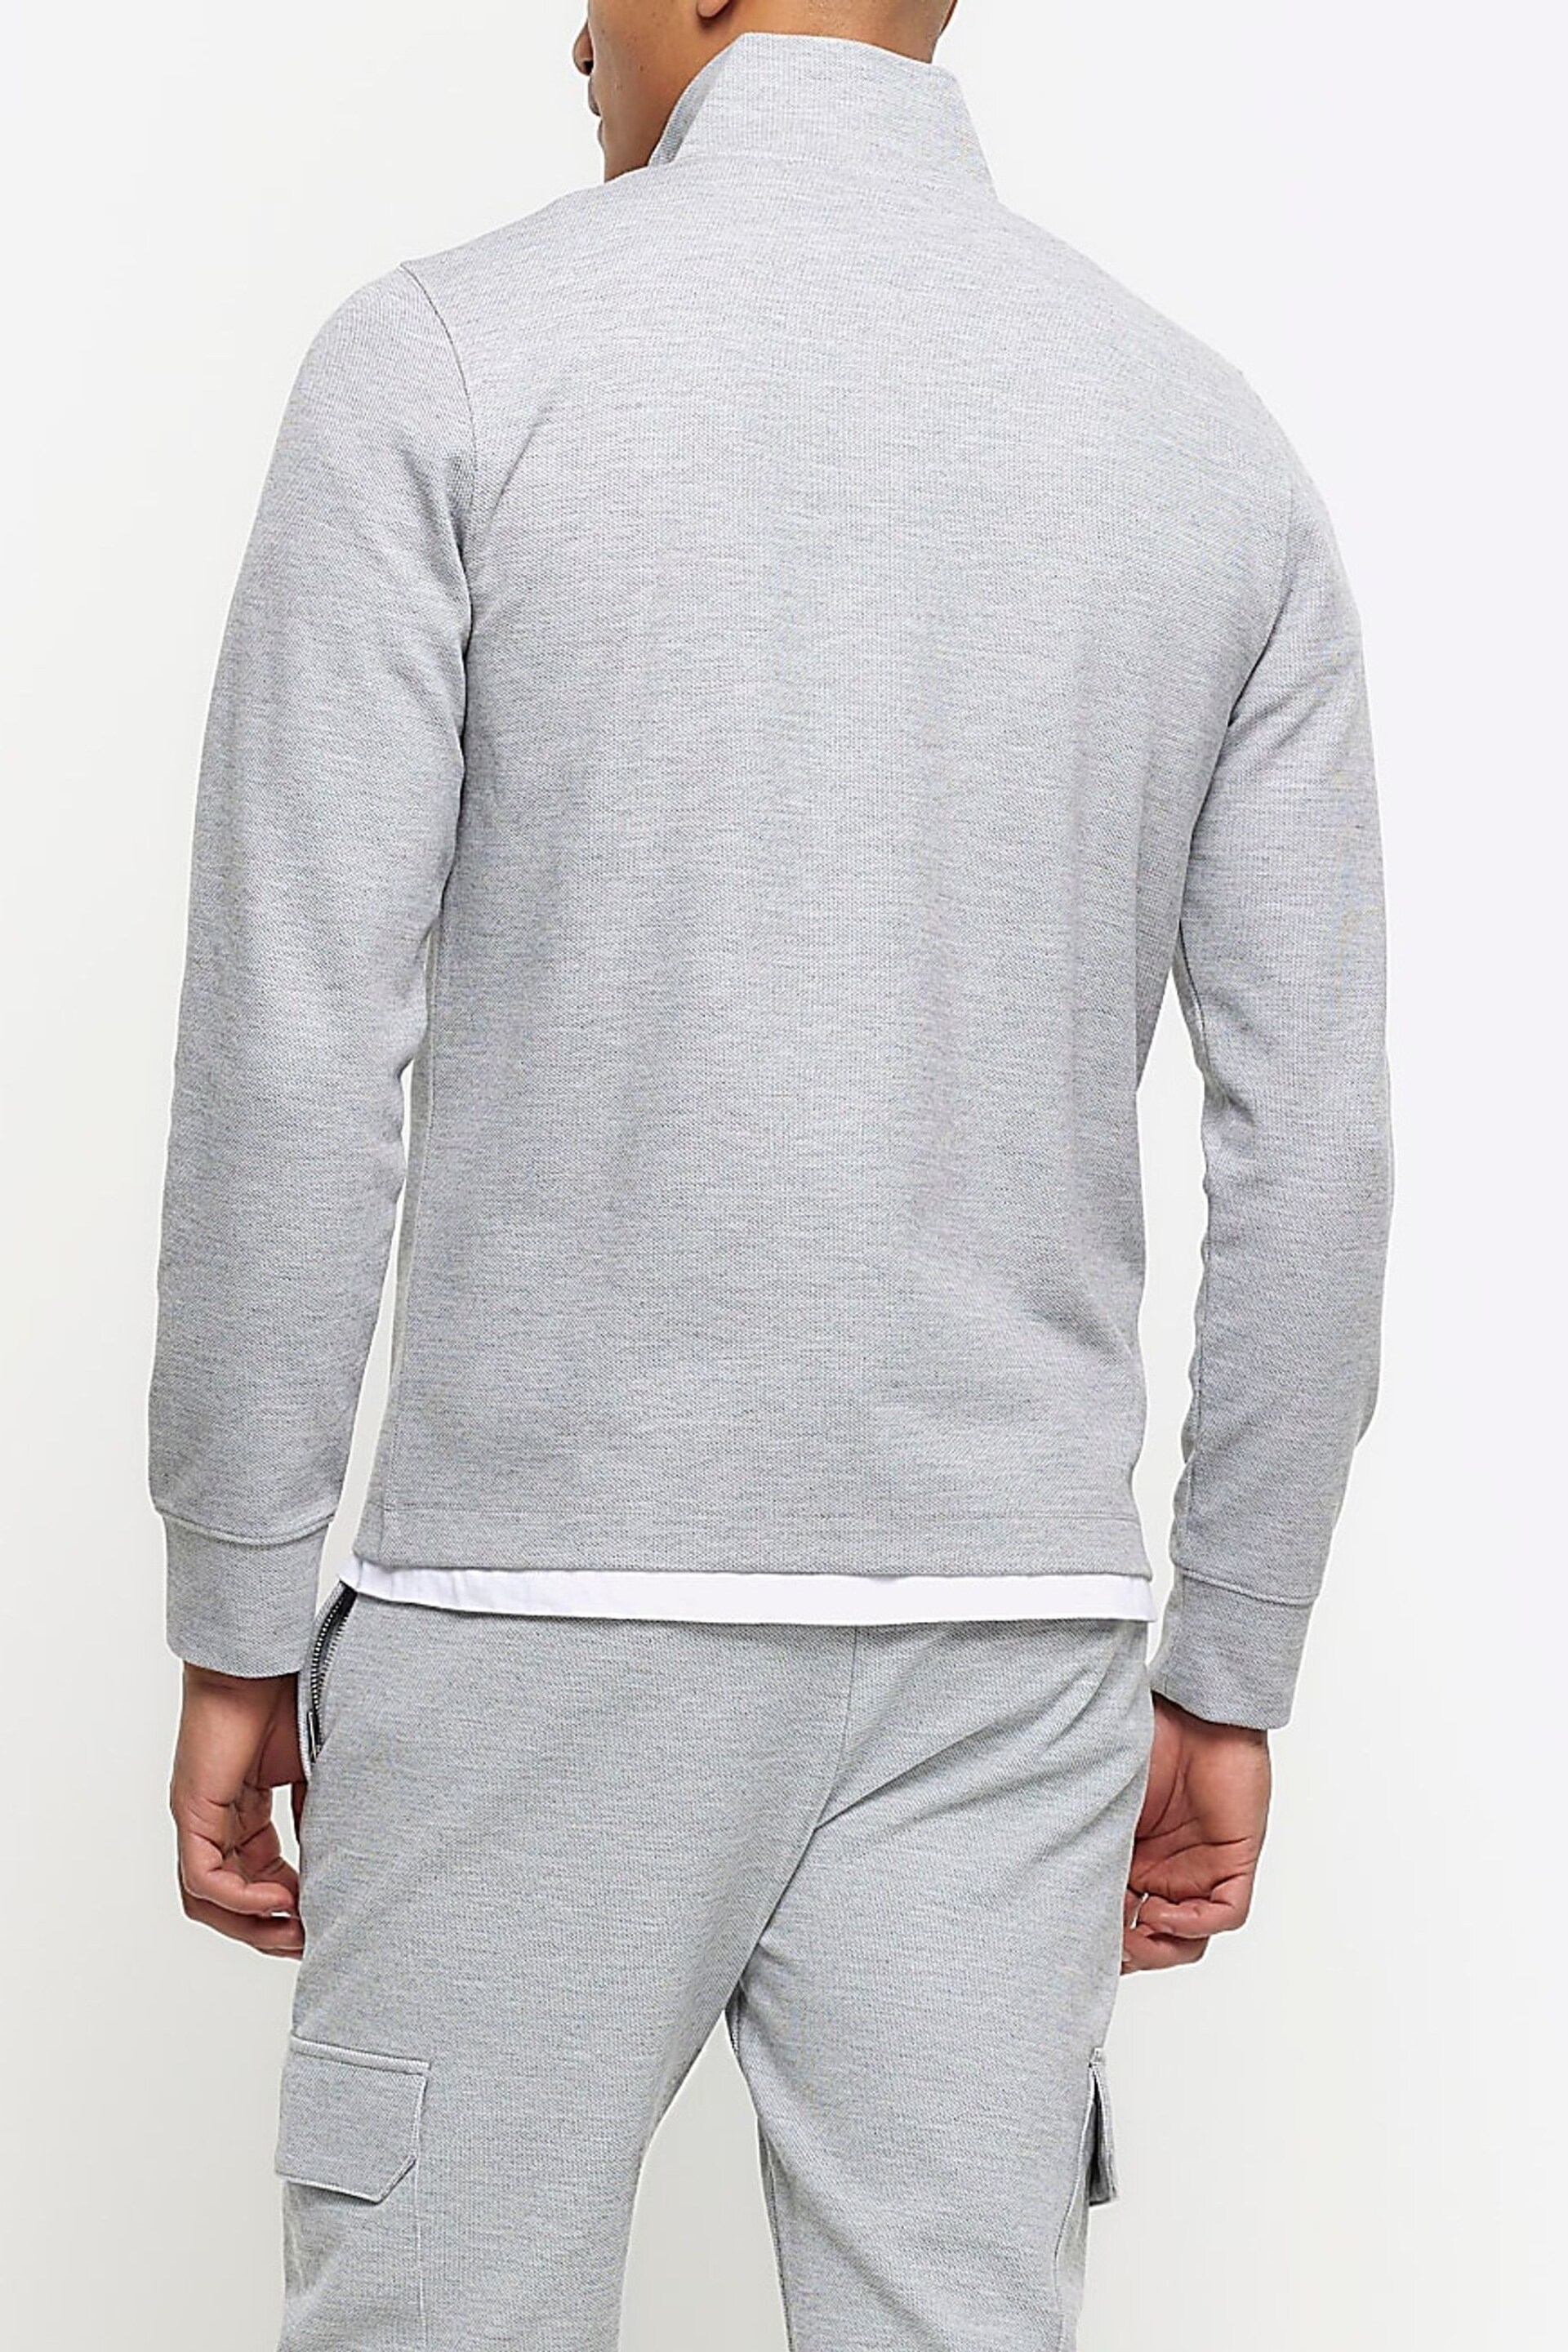 River Island Grey Slim Fit Textured Funnel Neck Sweat Shirt - Image 2 of 6